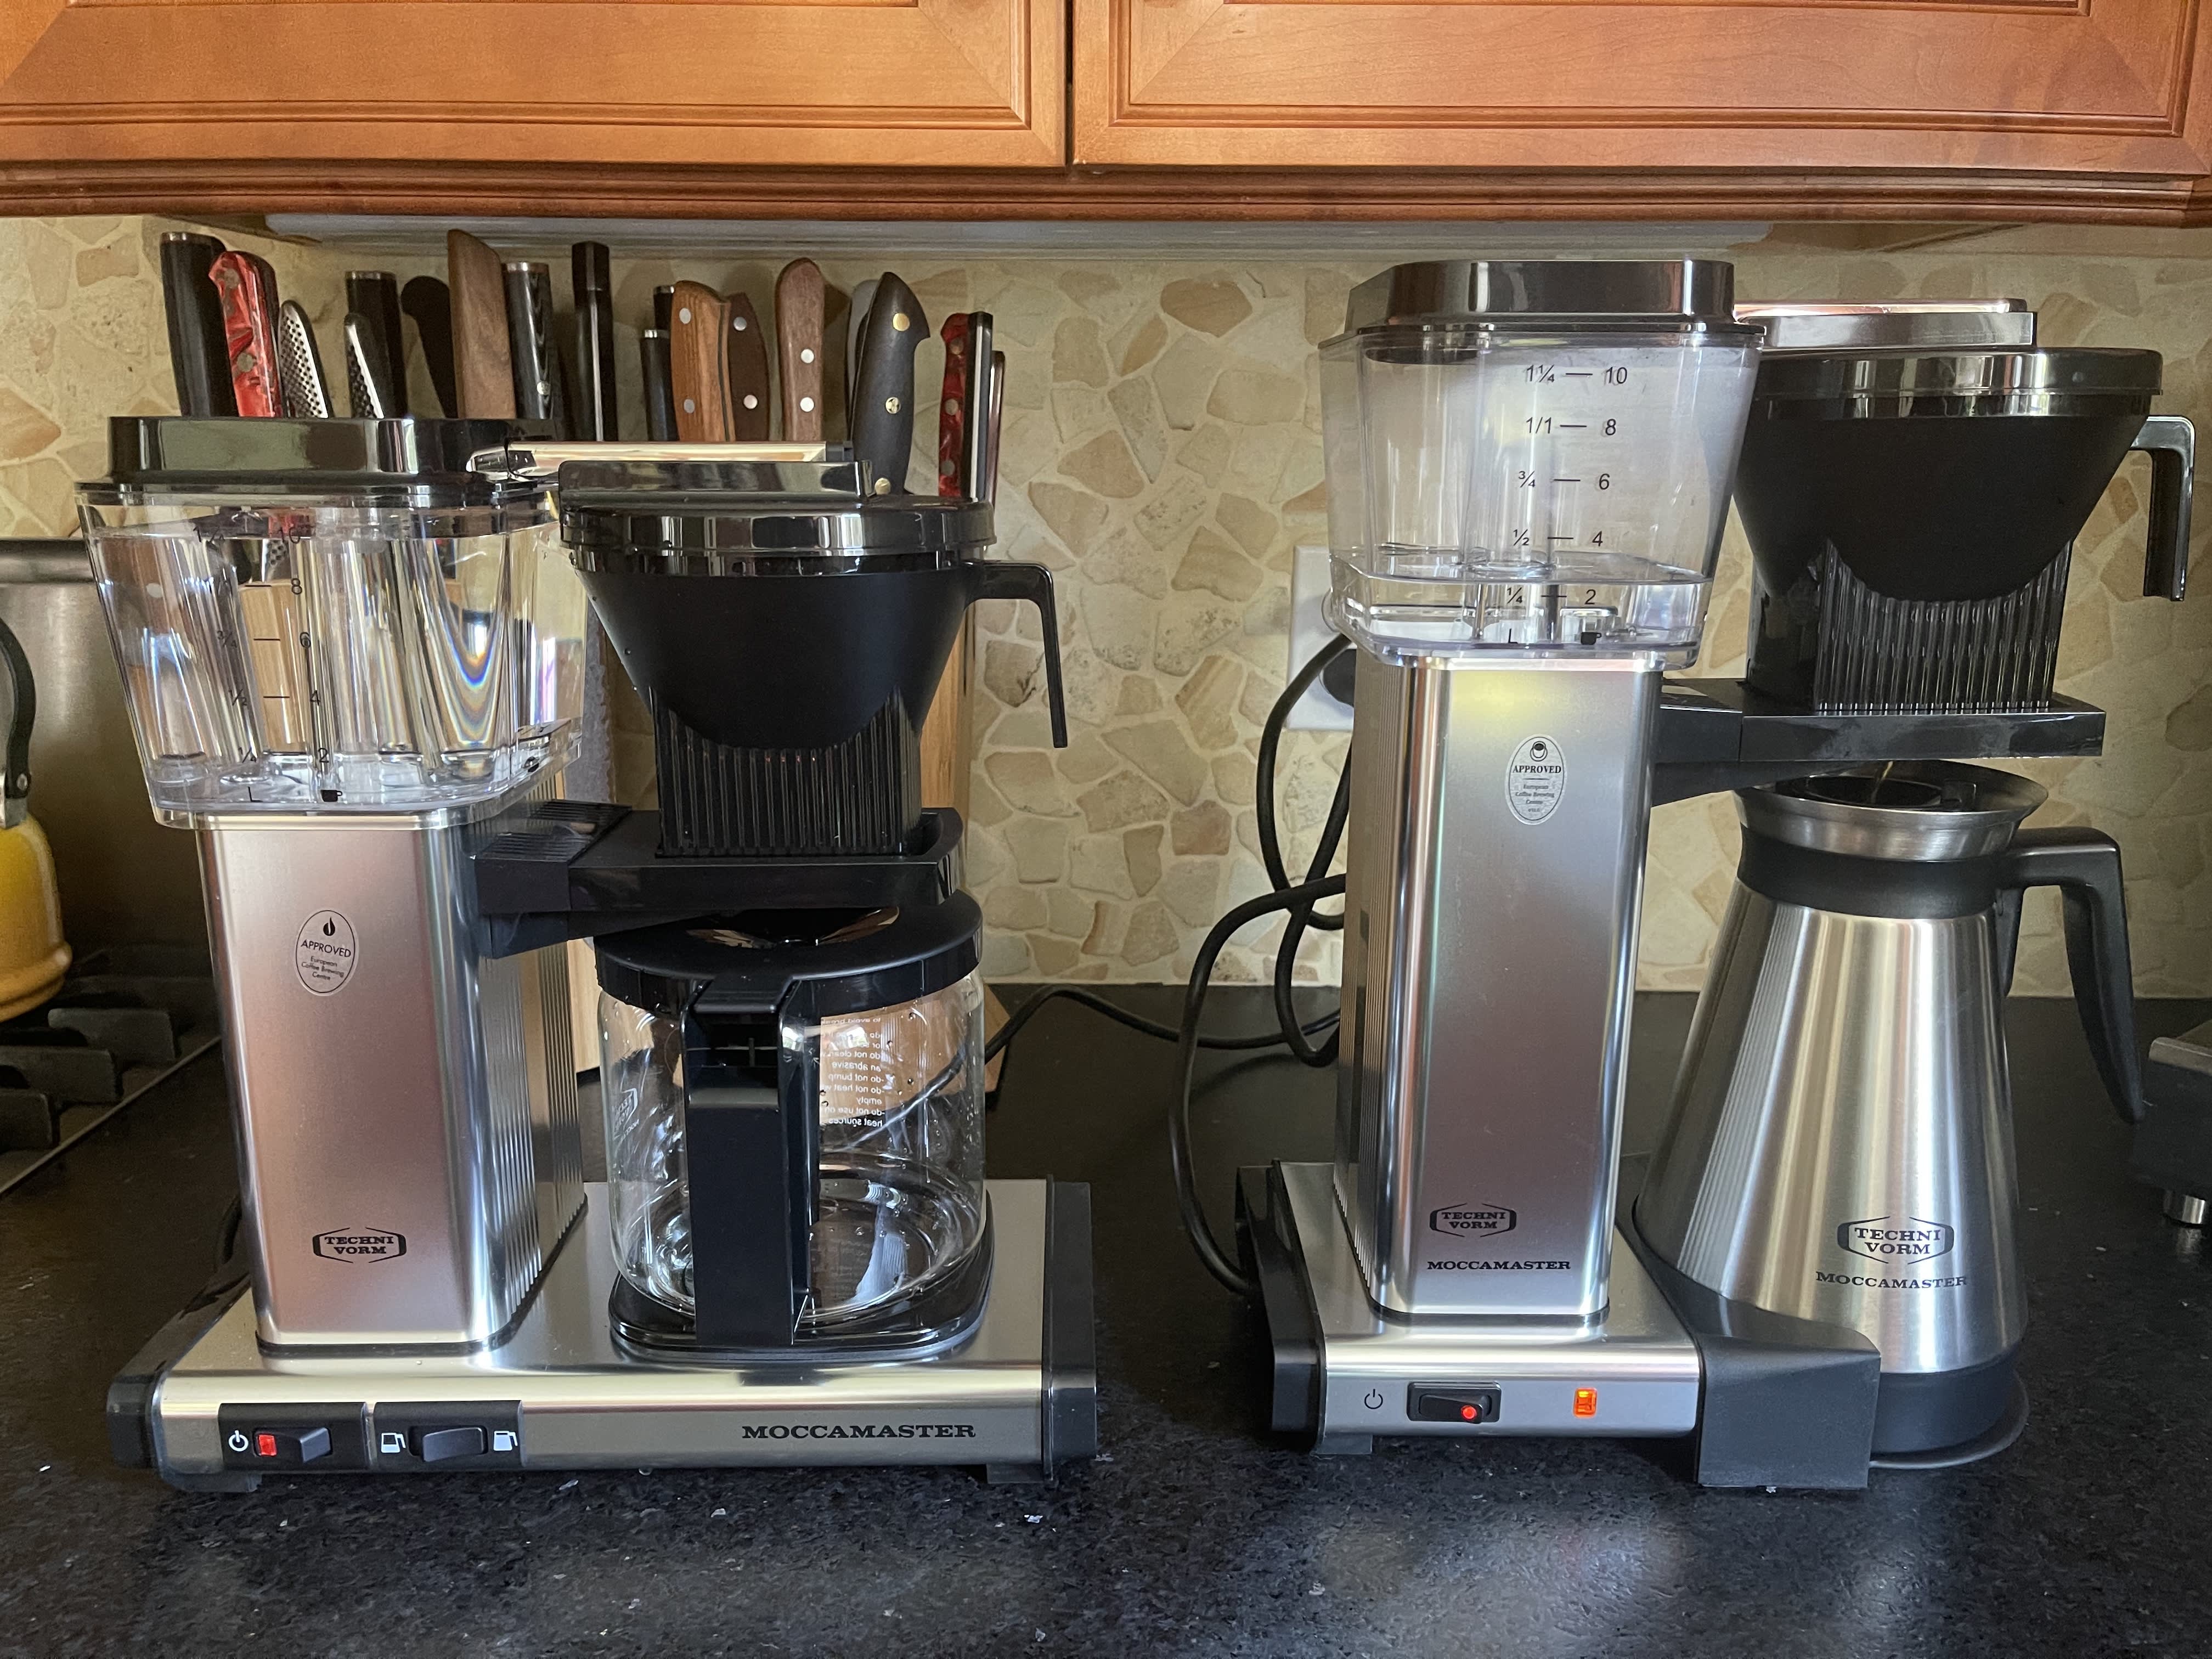 12 Best Coffee Makers of 2023, Tested & Reviewed by Experts